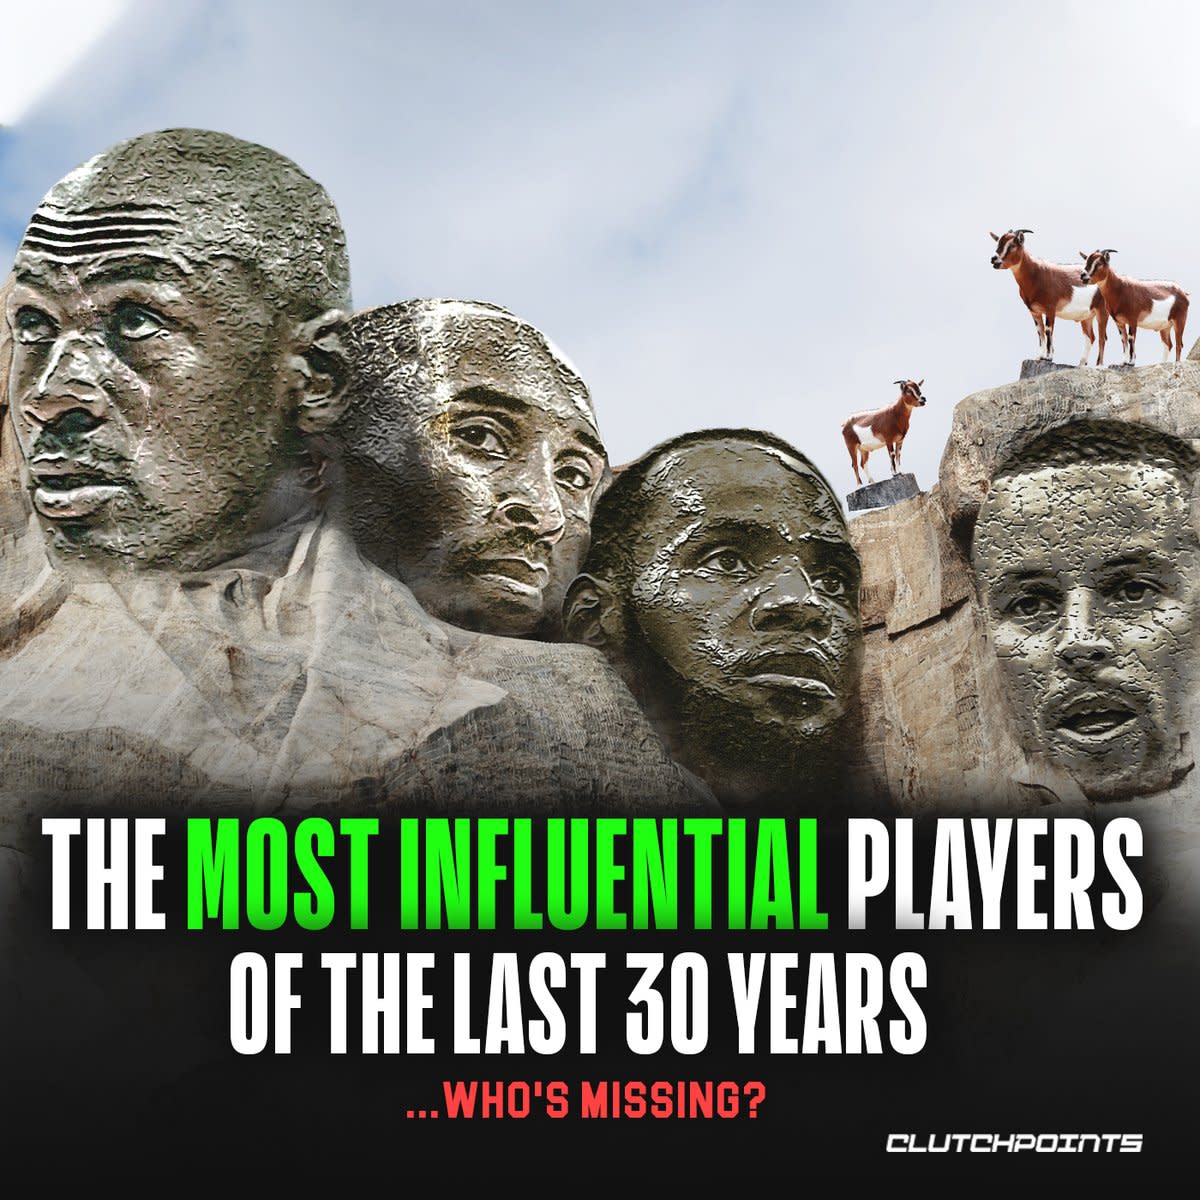 NBA Fans Select Who Should Be Fifth On The Most Influential Players Of The Last 30 Years: "Remove LeBron And Add Magic And Bird."